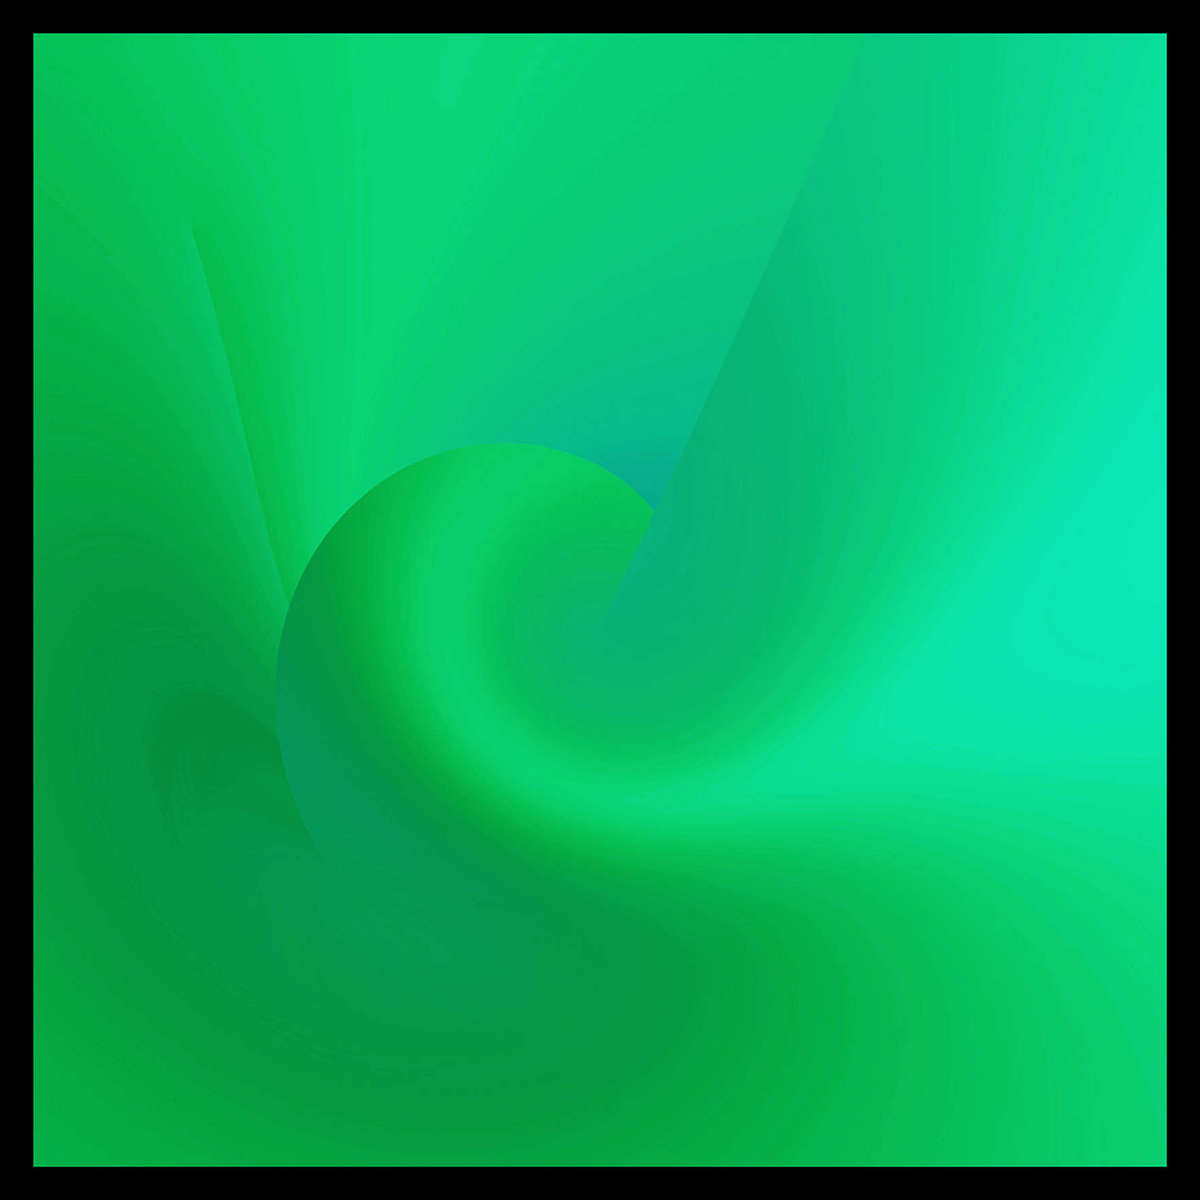 Rhapsody in Green : Section 0 : American artist digital invention archival artifact color print image emerging capture creative convergent transparency universe dream history painter Hybrid exhibition